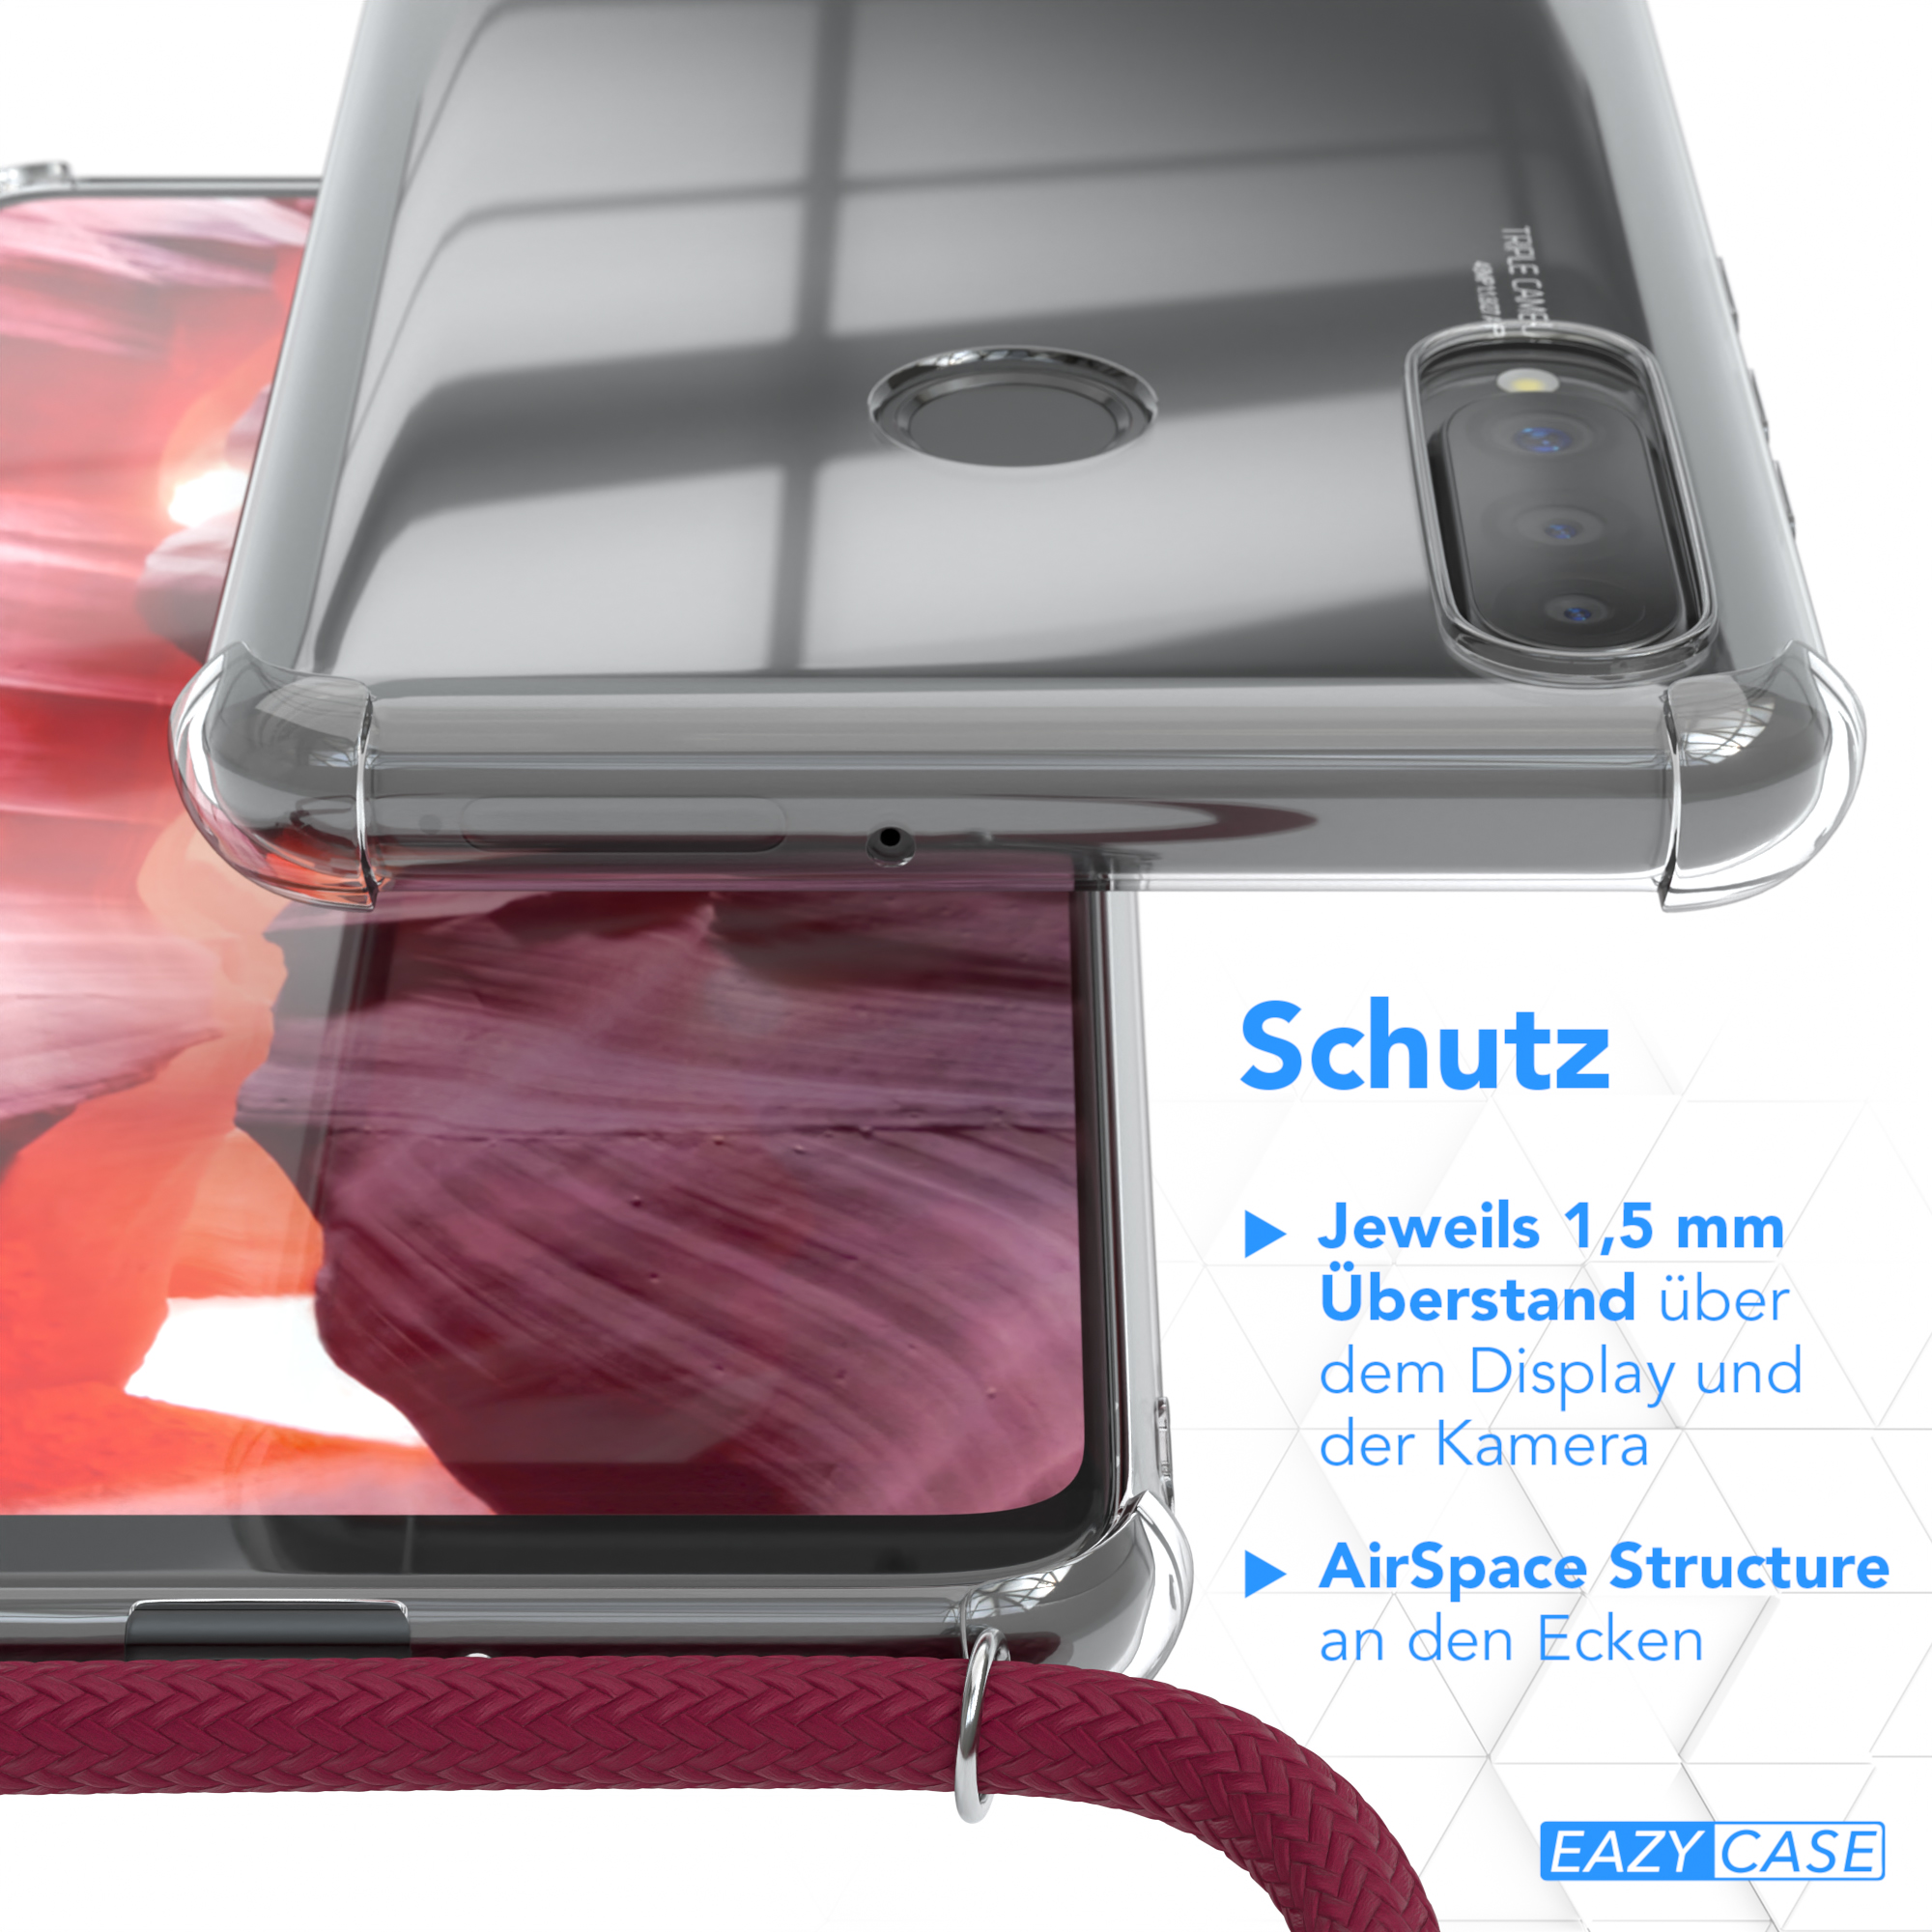 Umhängeband, mit Cover Lite, CASE Silber Huawei, EAZY Rot / Umhängetasche, P30 Clear Bordeaux Clips